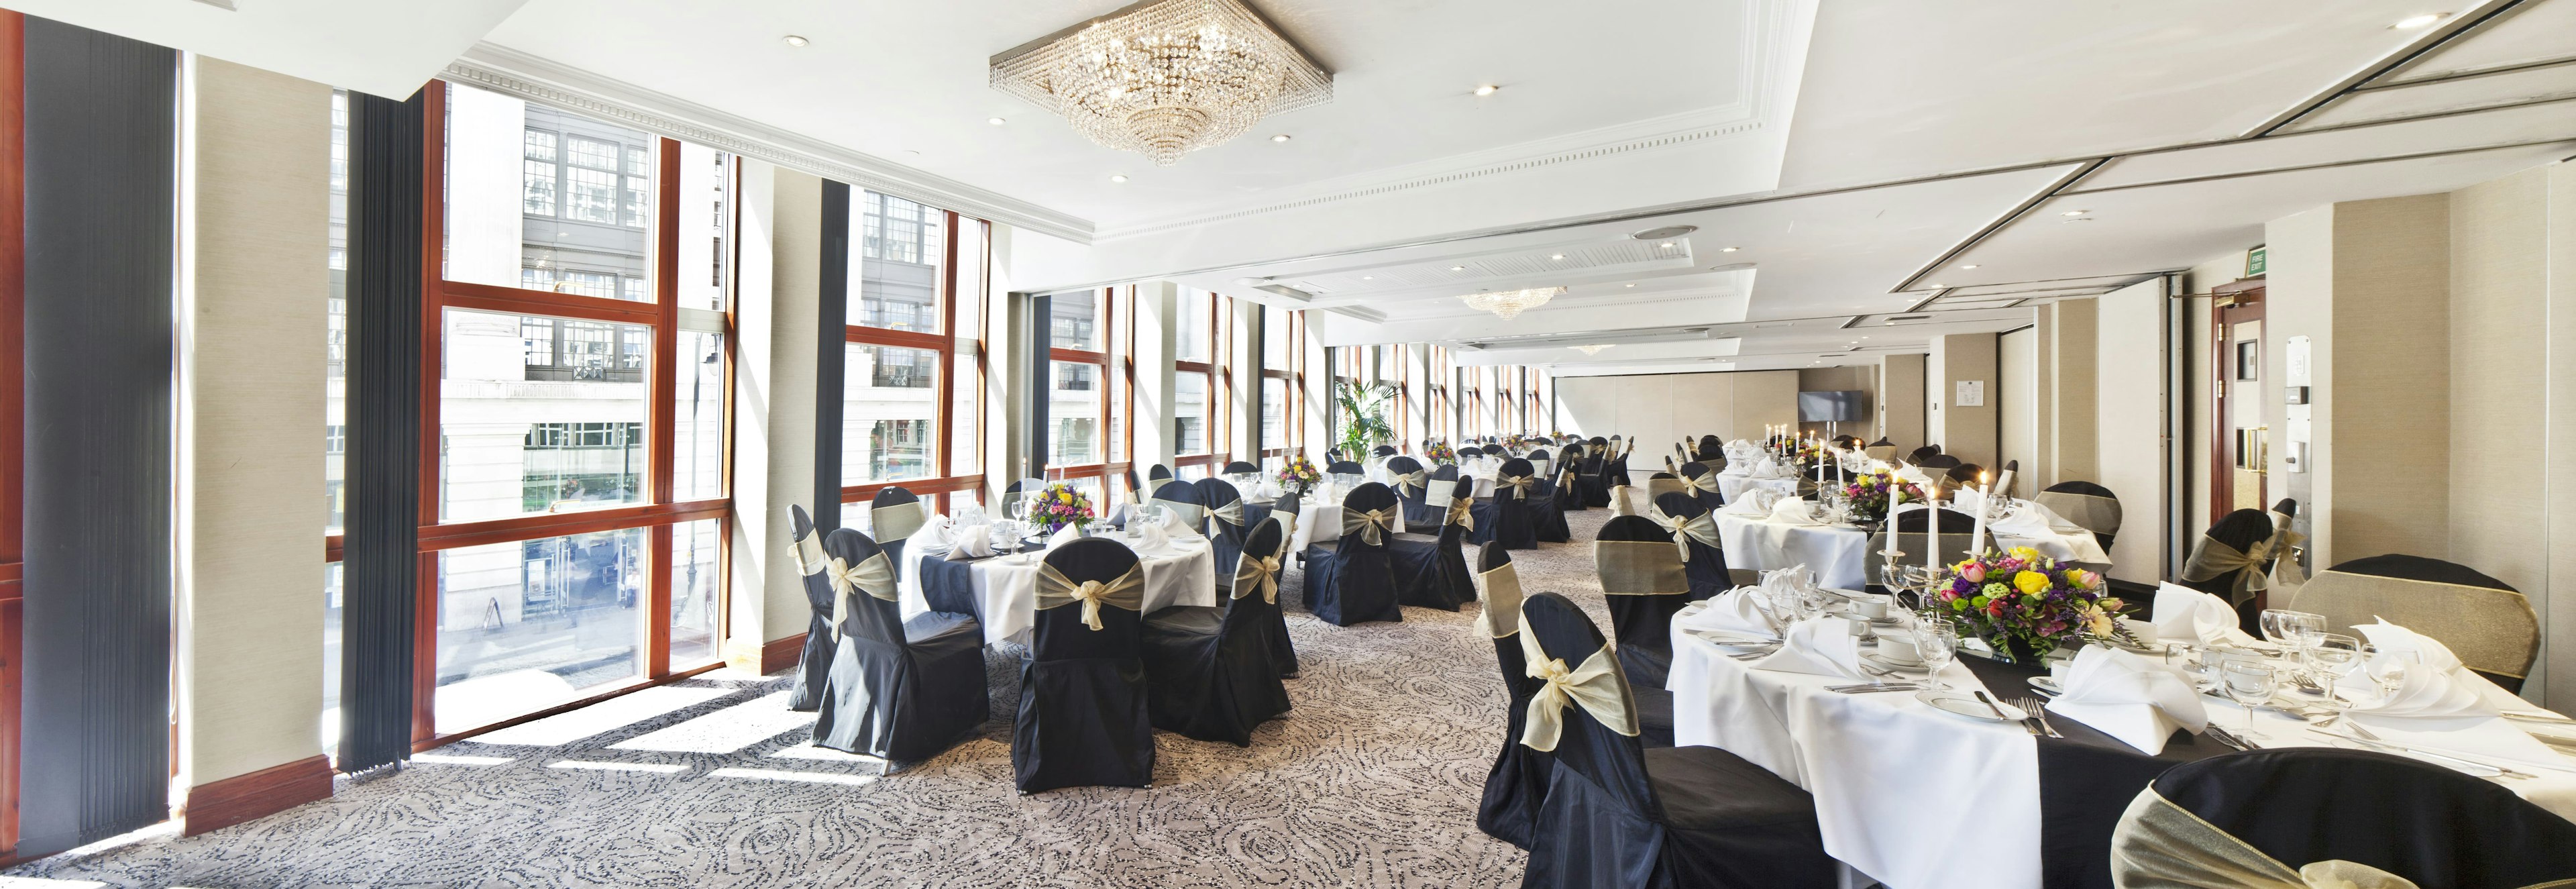 Hotel Conference Venues